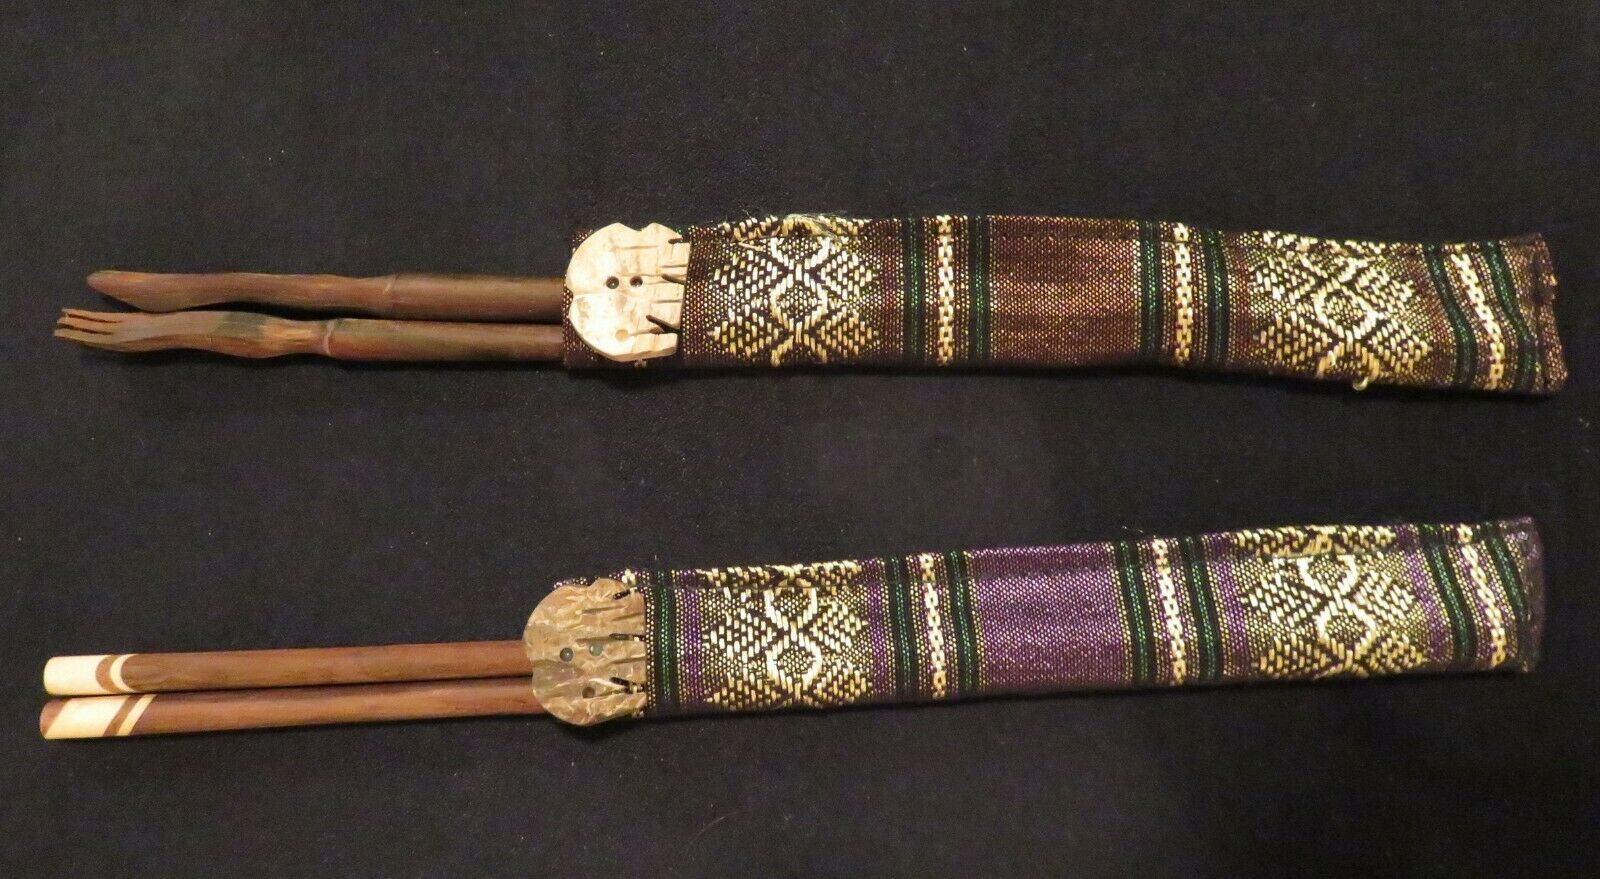 2 Pairs Decorative Wooden Chopsticks With Elephant On Sleeves